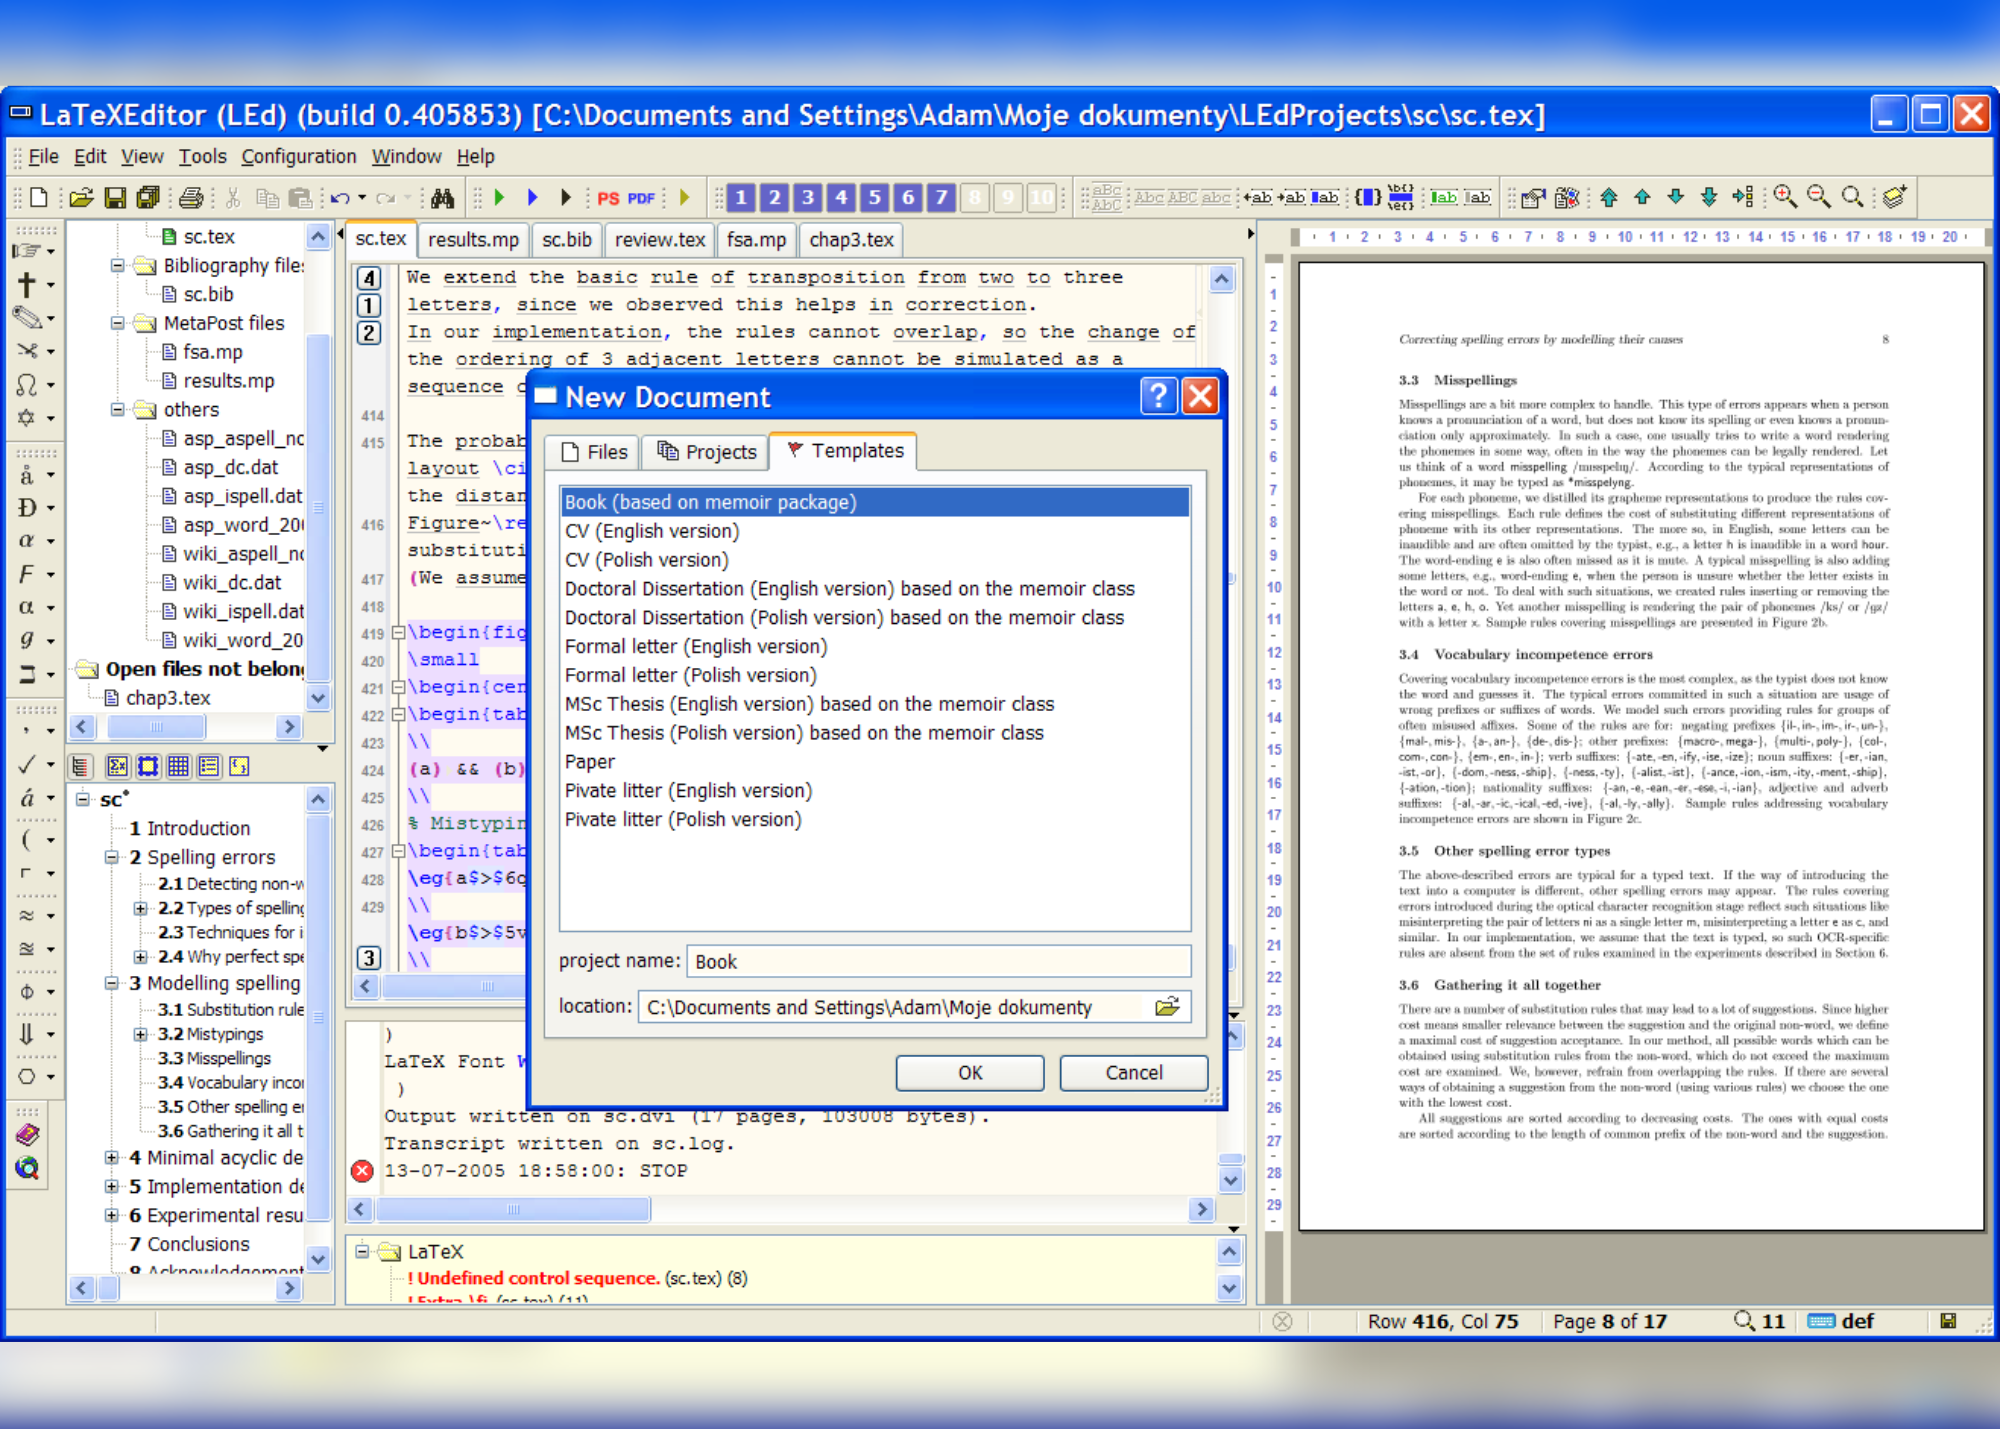 A screenshot of document templates and a draft document